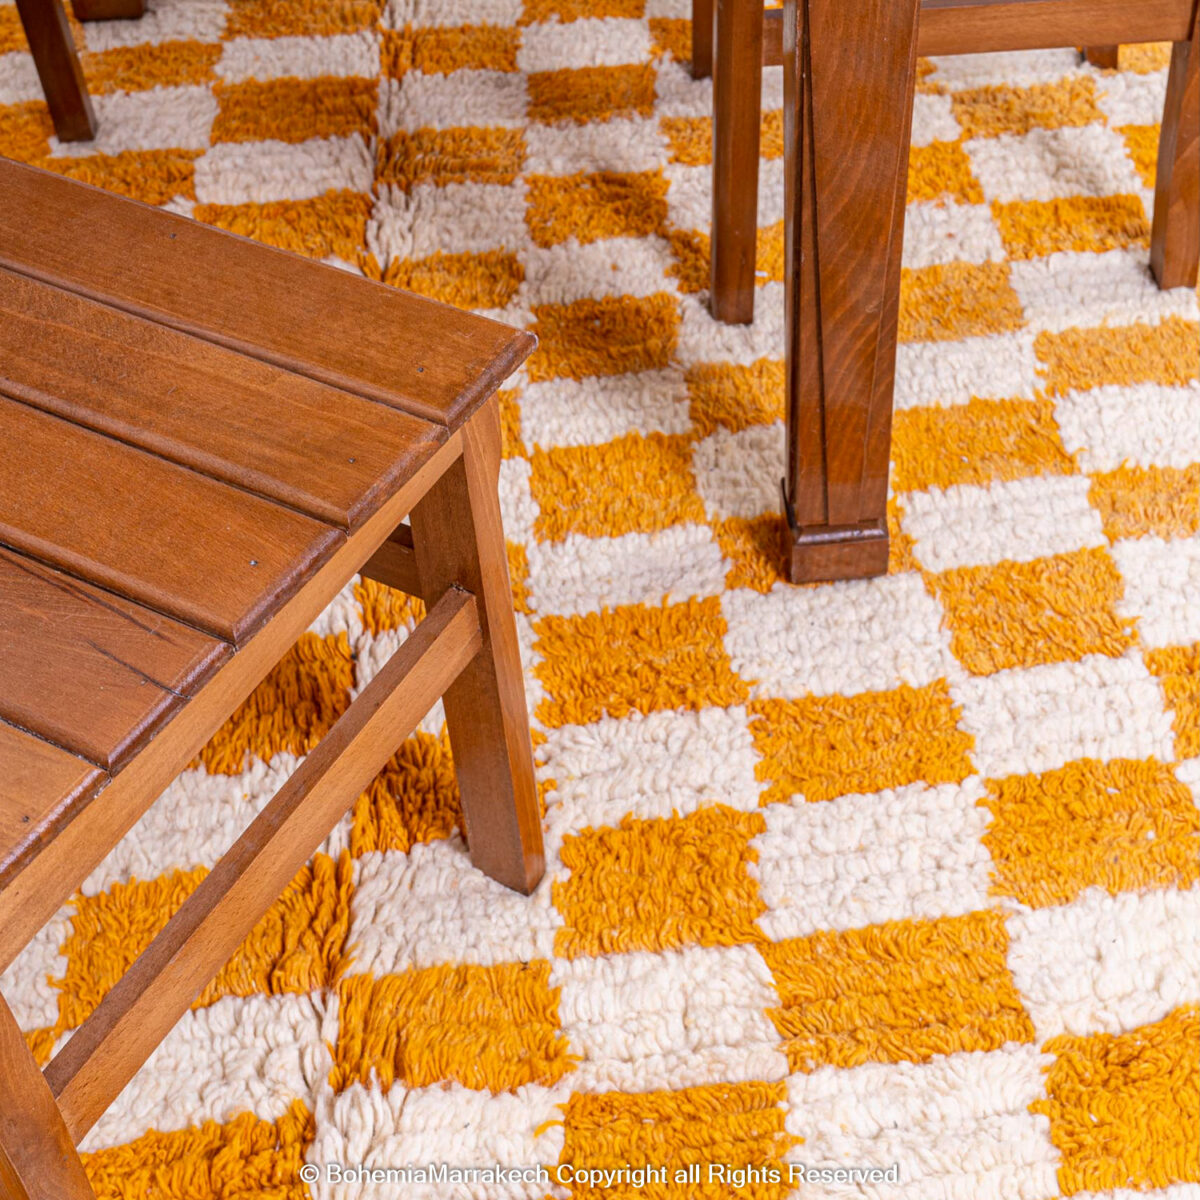 outdoor checkered rug, mustard color rug, yellow and gray area rug, yellow and grey area rug, outdoor rug checkered, yellow gray area rug, yellow grey area rug, yellow outdoor carpet, outdoor rug with yellow, area rug grey yellow, yellow rug outdoor, outdoor carpet yellow, area rugs with yellow and grey, checkered shag rug, blue checkered rug, yellow rugs for living room, yellow bathroom rugs, yellow rug living room, blue and yellow area rug, yellow kitchen rugs, blue yellow area rug, yellow carpet living room, yellow rugs for bathroom, living room rugs yellow, area rugs yellow and blue, yellow rug kitchen, yellow carpet for living room, area rugs with blue and yellow, area rug blue yellow, bathroom rugs in yellow, bathroom yellow rugs, living room yellow rug, yellow rug bathroom, yellow rug in living room, blue plaid rug, mustard yellow rug, plaid rug 8x10, burnt orange area rug, ruggable checkered rug, yellow carpet, black checkered rug, round yellow rug, green and yellow rug, yellow circle rug, yellow green rug, black check rug, yellow round carpet, round yellow carpet, outdoor plaid rugs, black check carpet